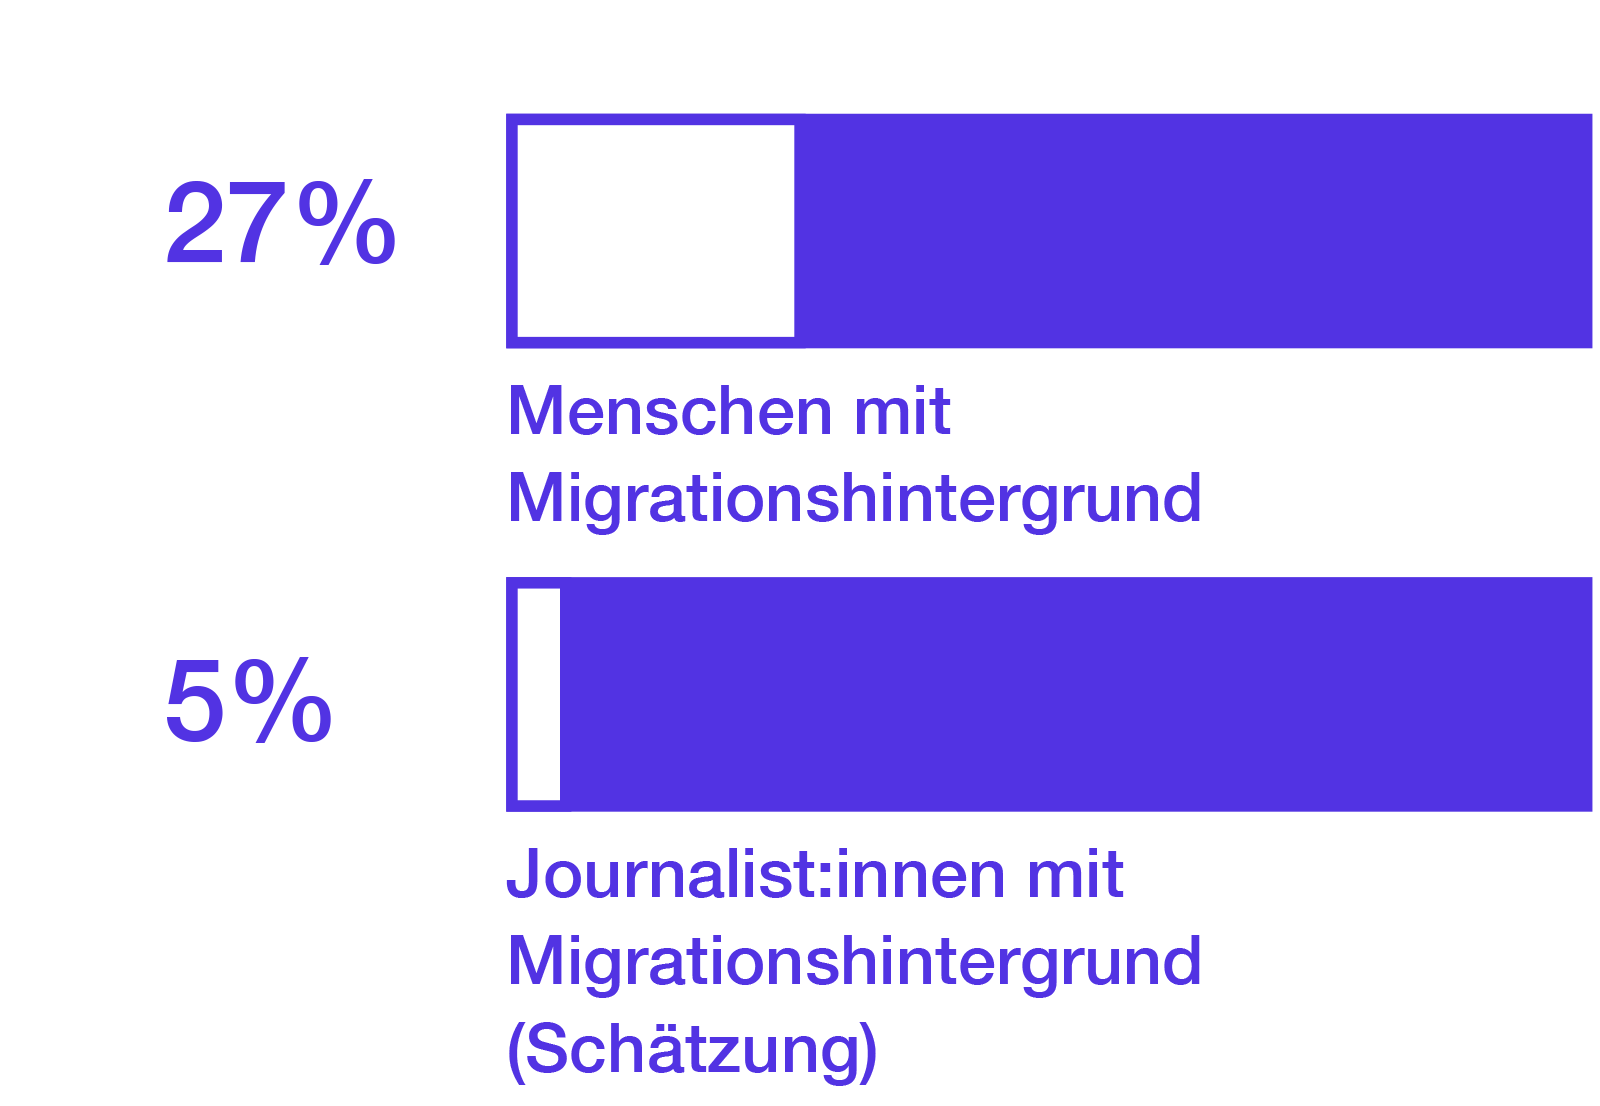 27 % Population with an immigrant background. 5 % Journalists with an immigrant background.